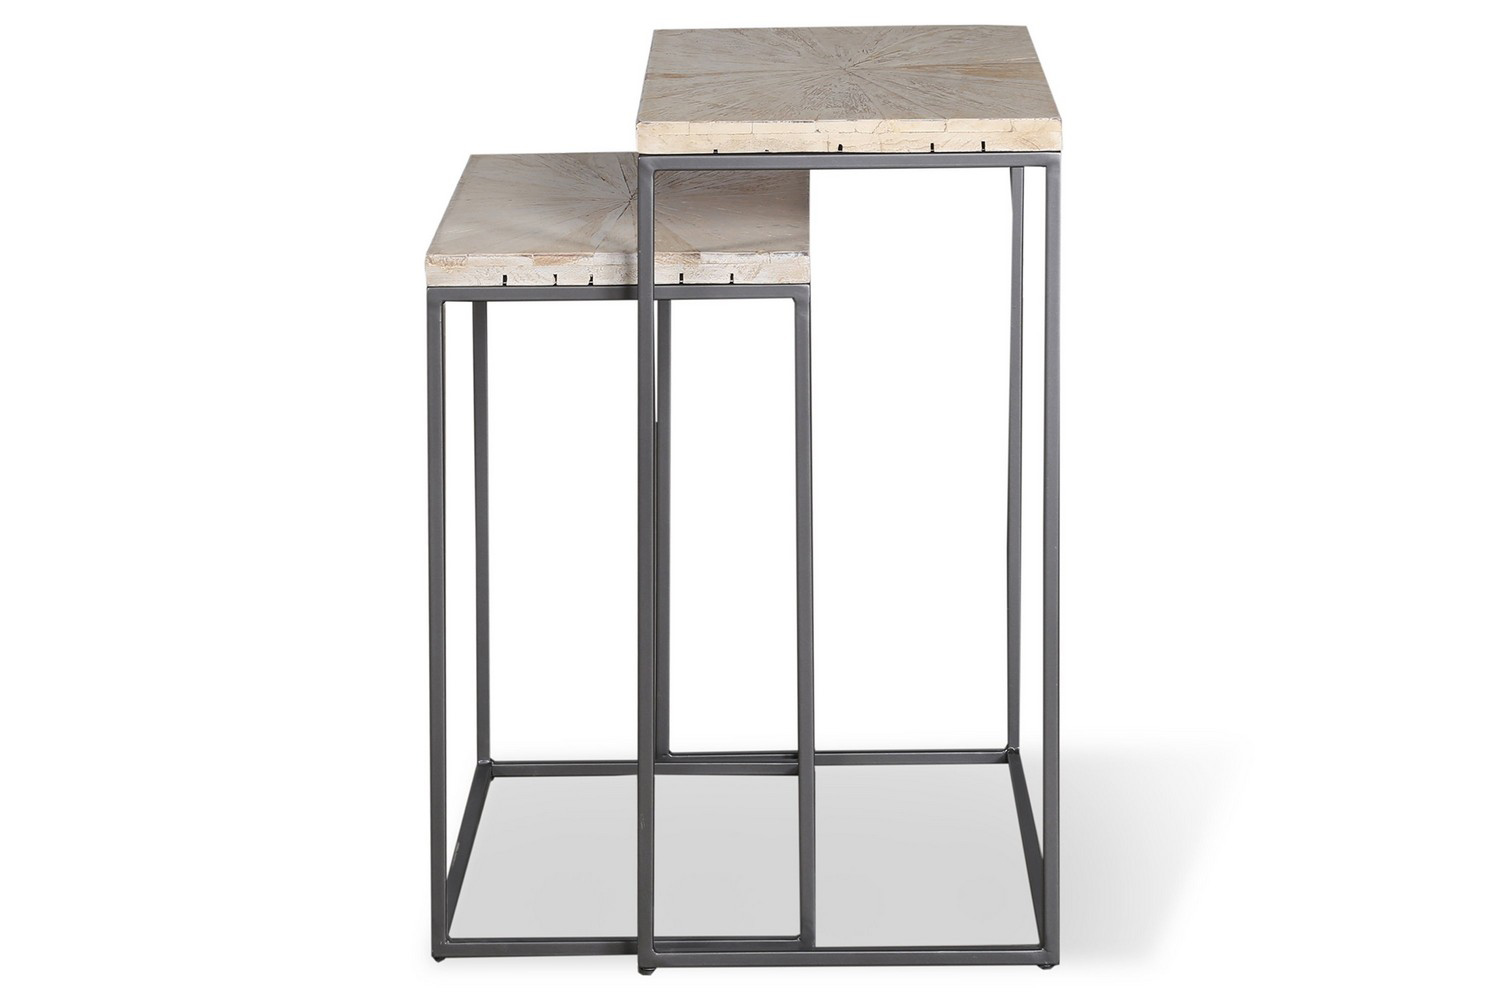 Parker House Crossings Monaco Chairside Nesting Table - Weathered Blanc